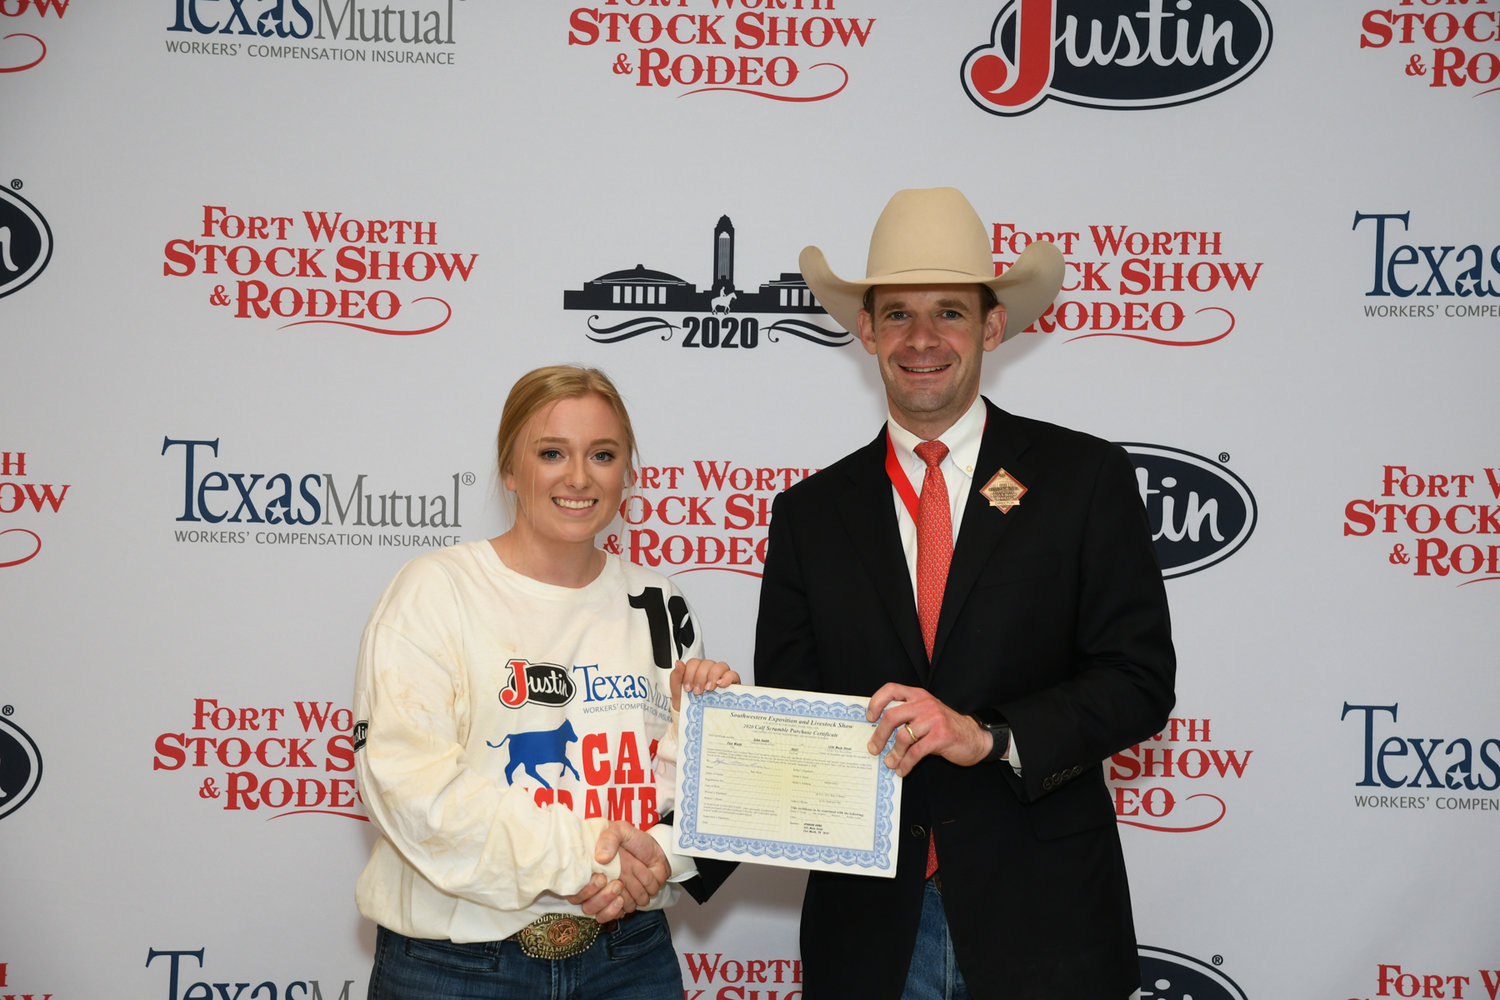 Avery von Reyn won a $500 purchase certificate toward a heifer for a 4-H or FFA project for exhibition at next year’s Fort Worth Stock Show & Rodeo. The certificate, presented by Stock Show Calf Scramble Committee Chairman Paxton Motheral, was sponsored by American Auto Salvage. (Courtesy photo)